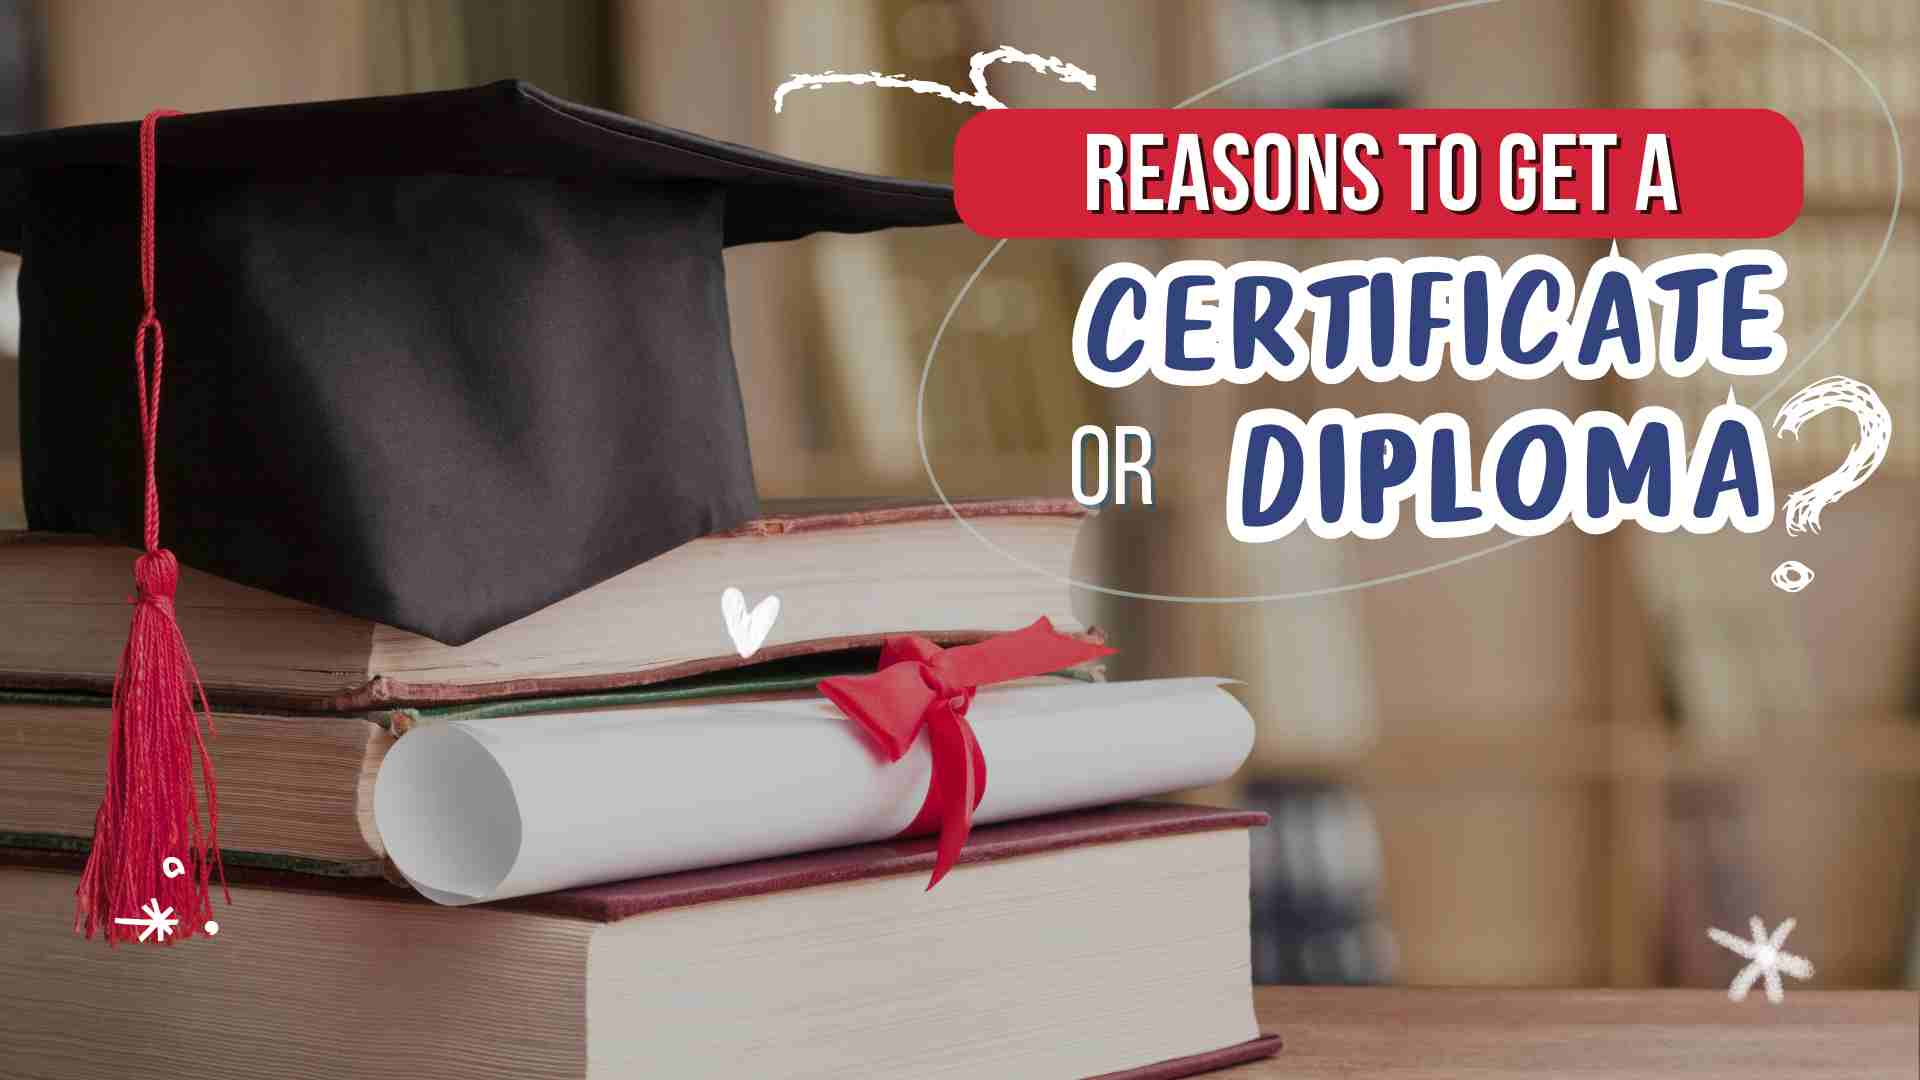 Reasons to get a certificate or diploma